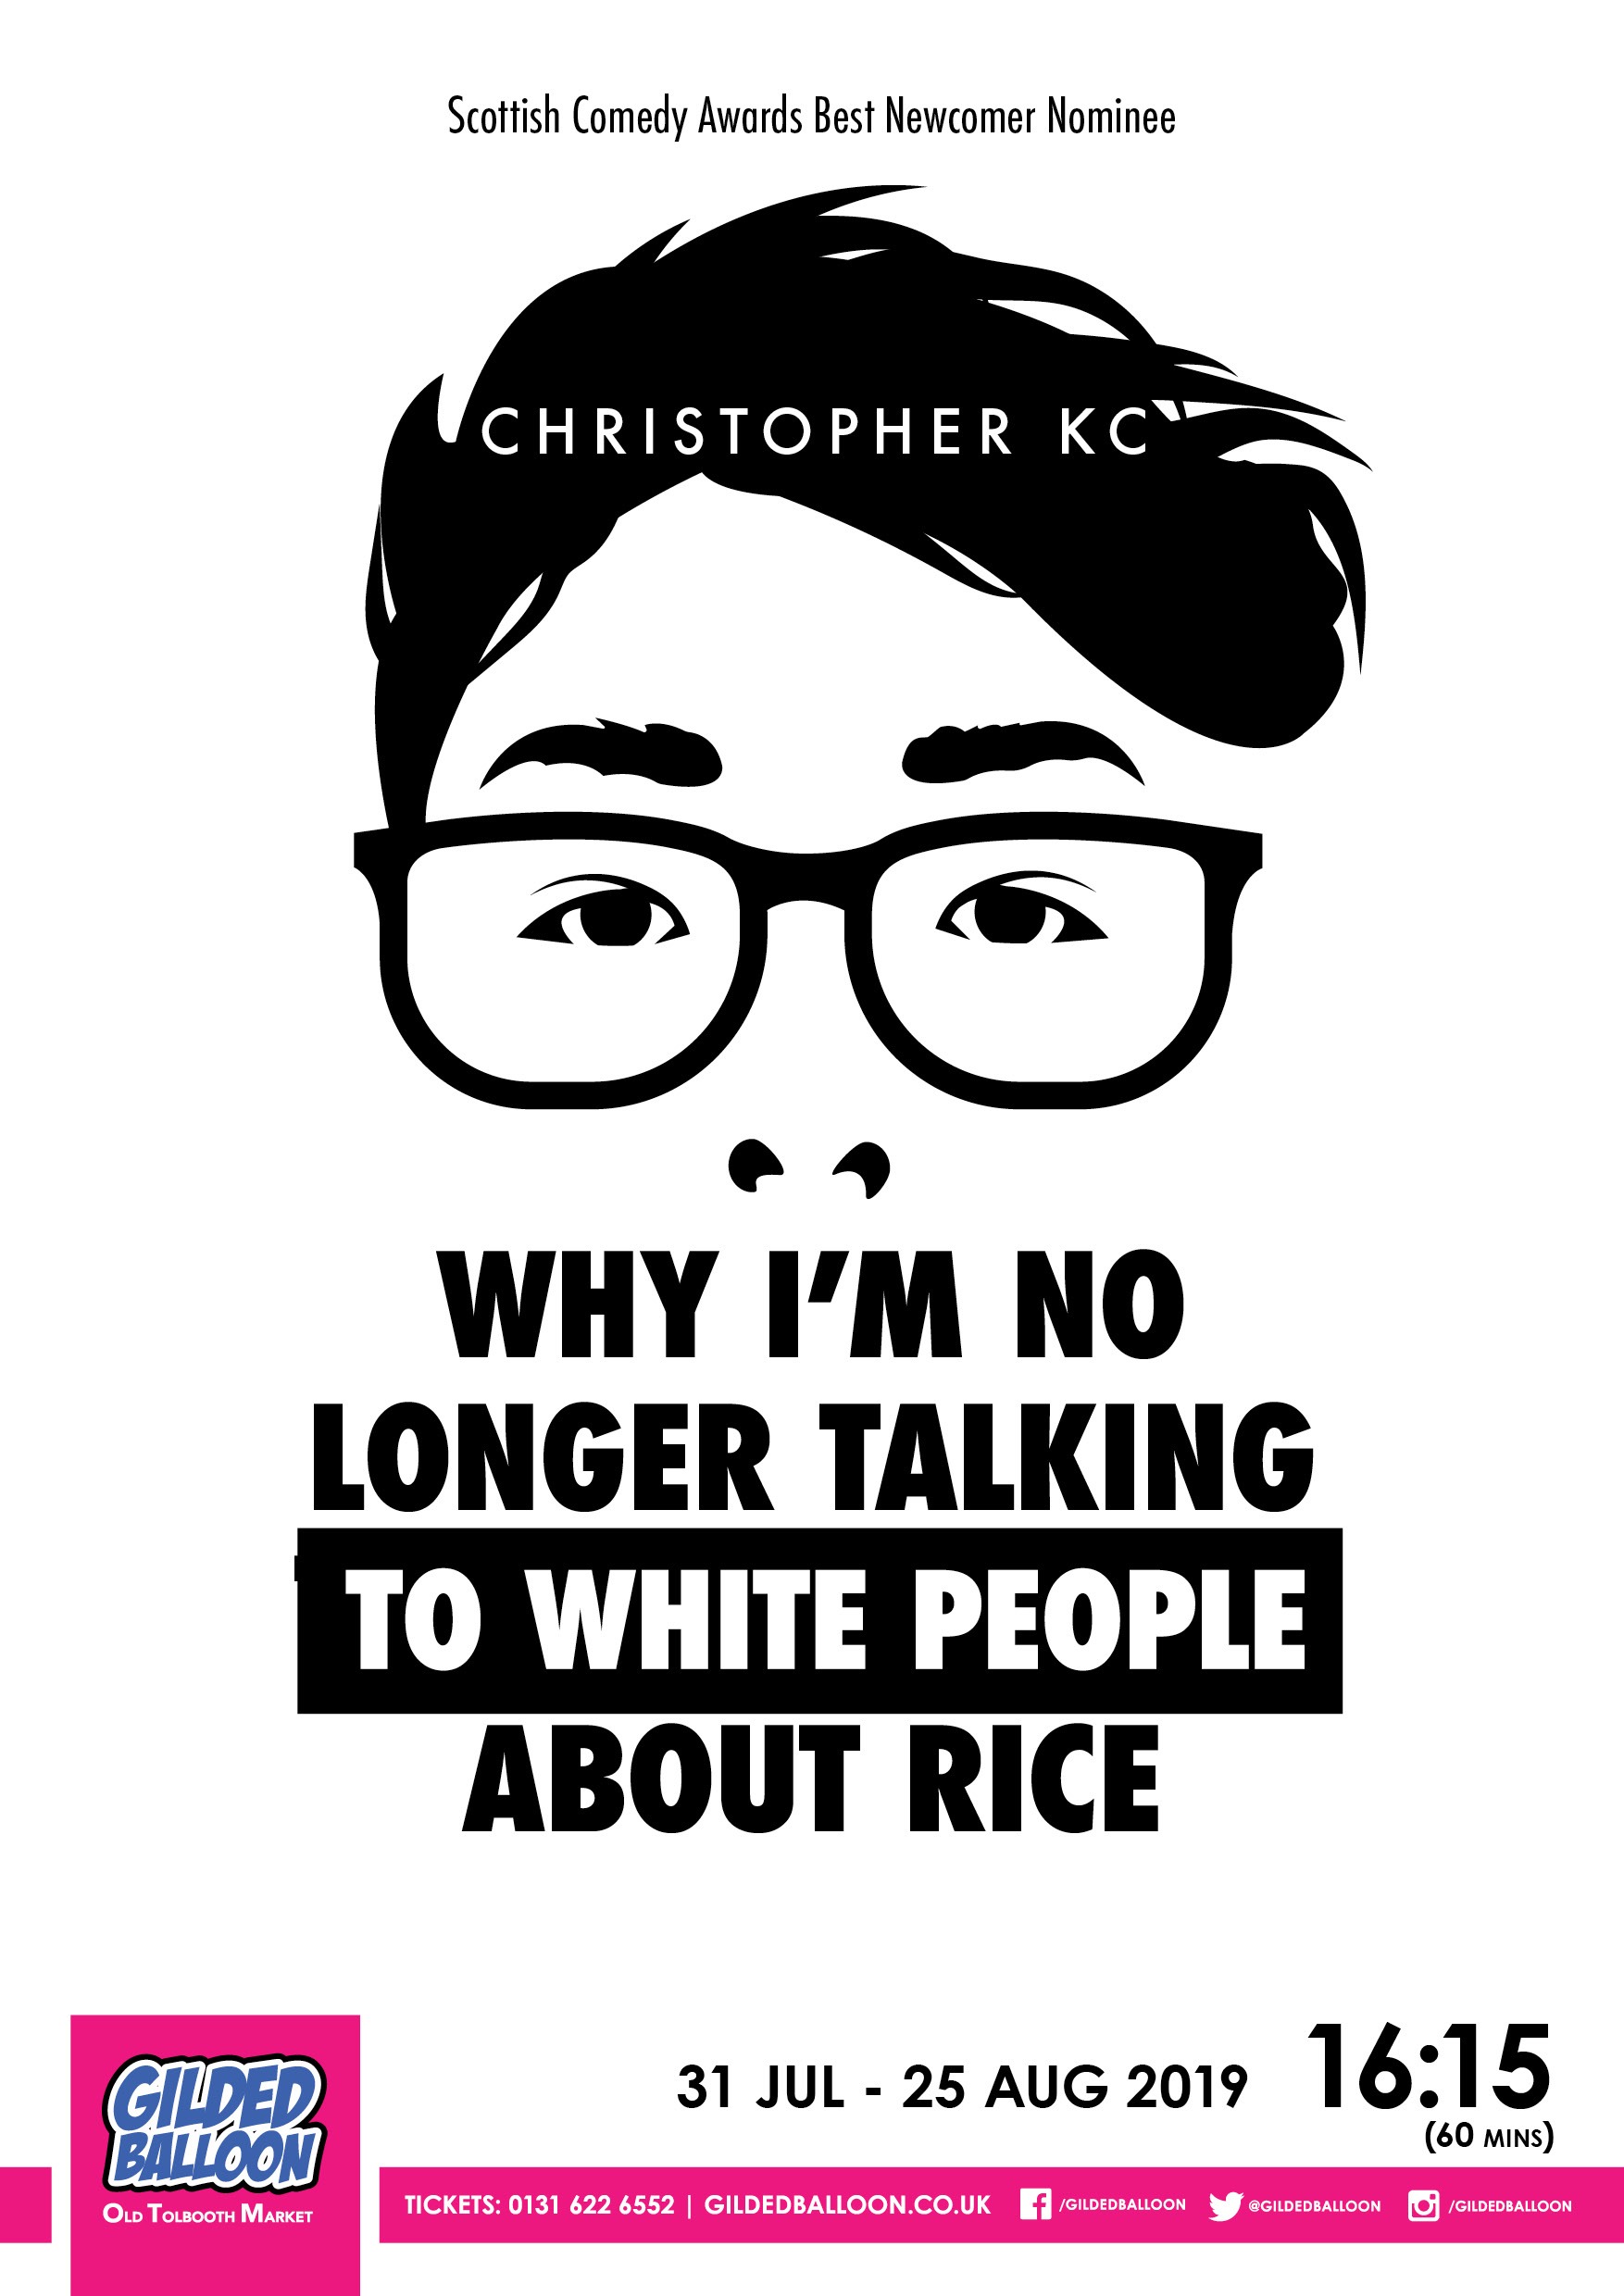 The poster for Christopher KC: Why I'm No Longer Talking to White People About Rice